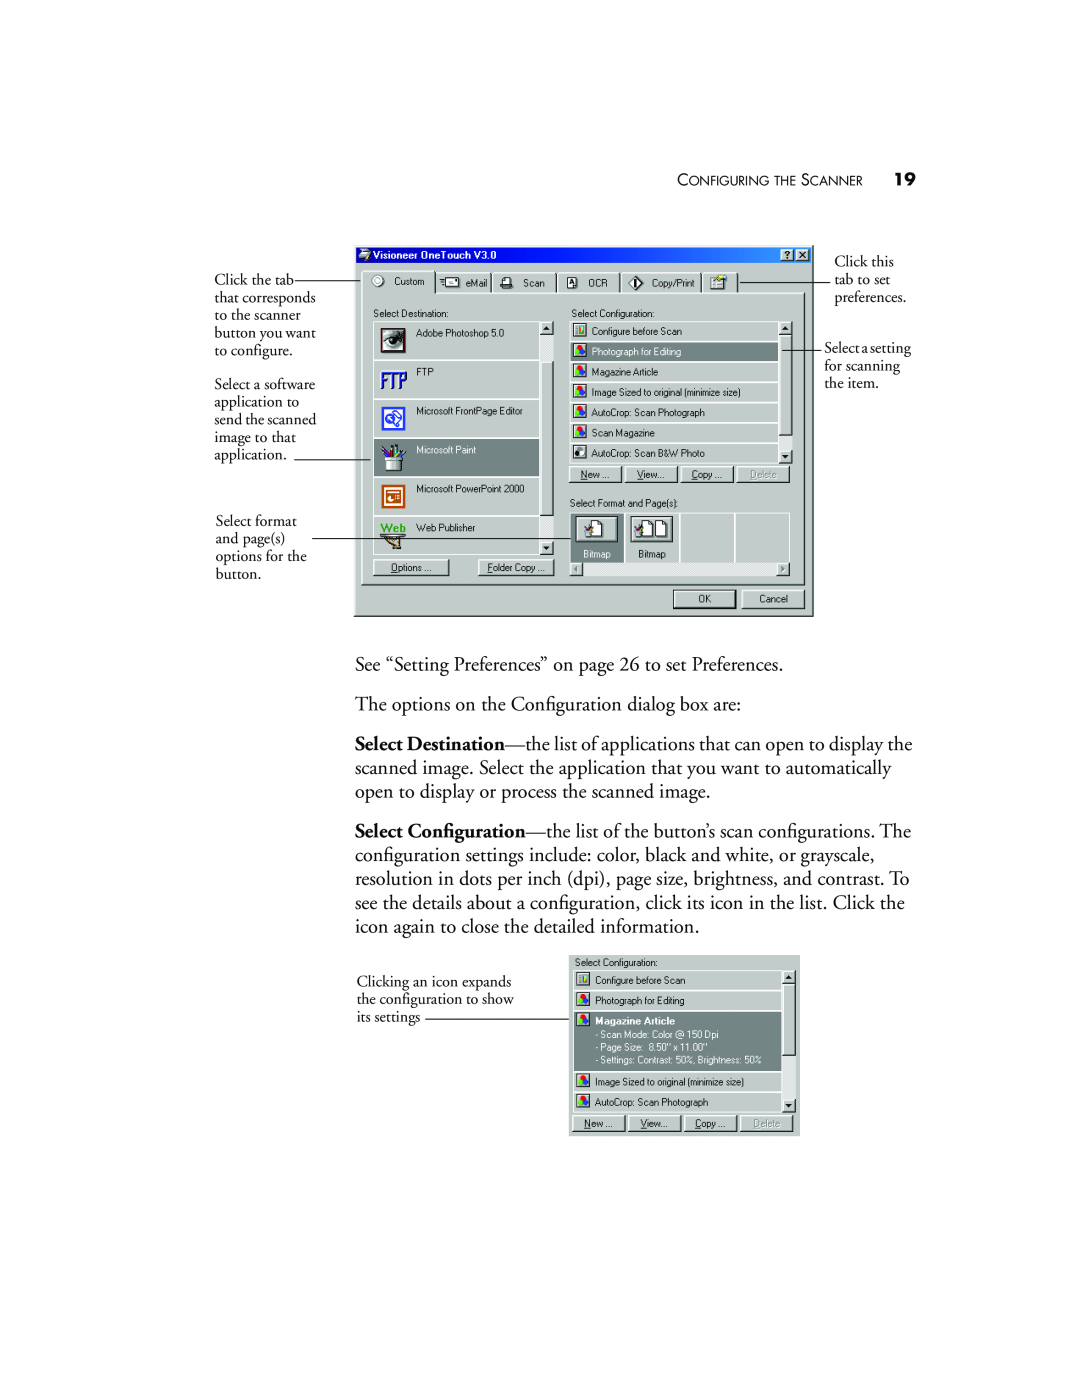 Visioneer 7100 manual See “Setting Preferences” on page 26 to set Preferences 